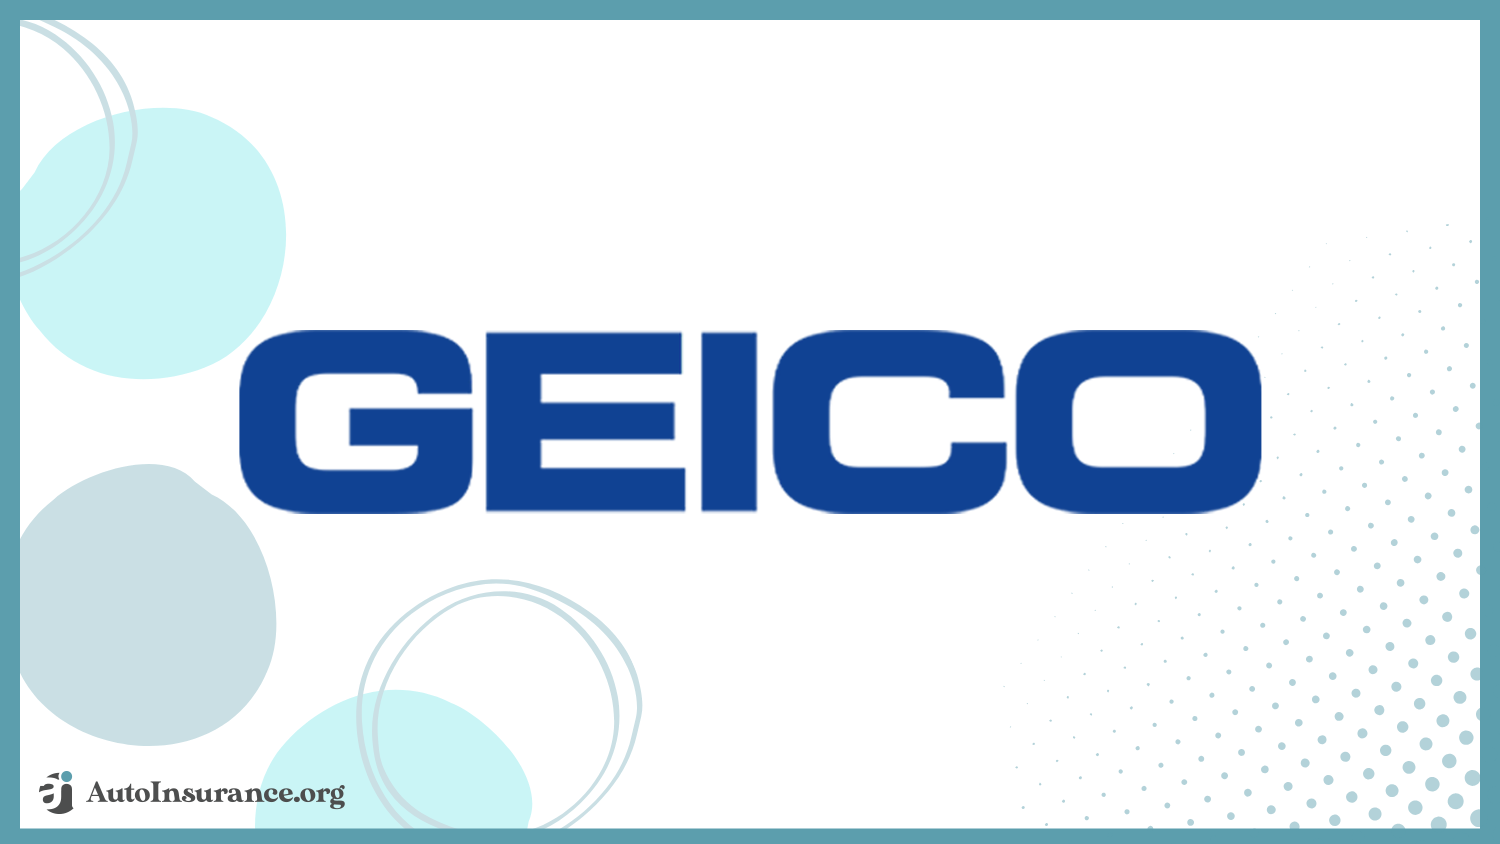 Geico: Best Auto Insurance for Wheelchair-Accessible Vehicles